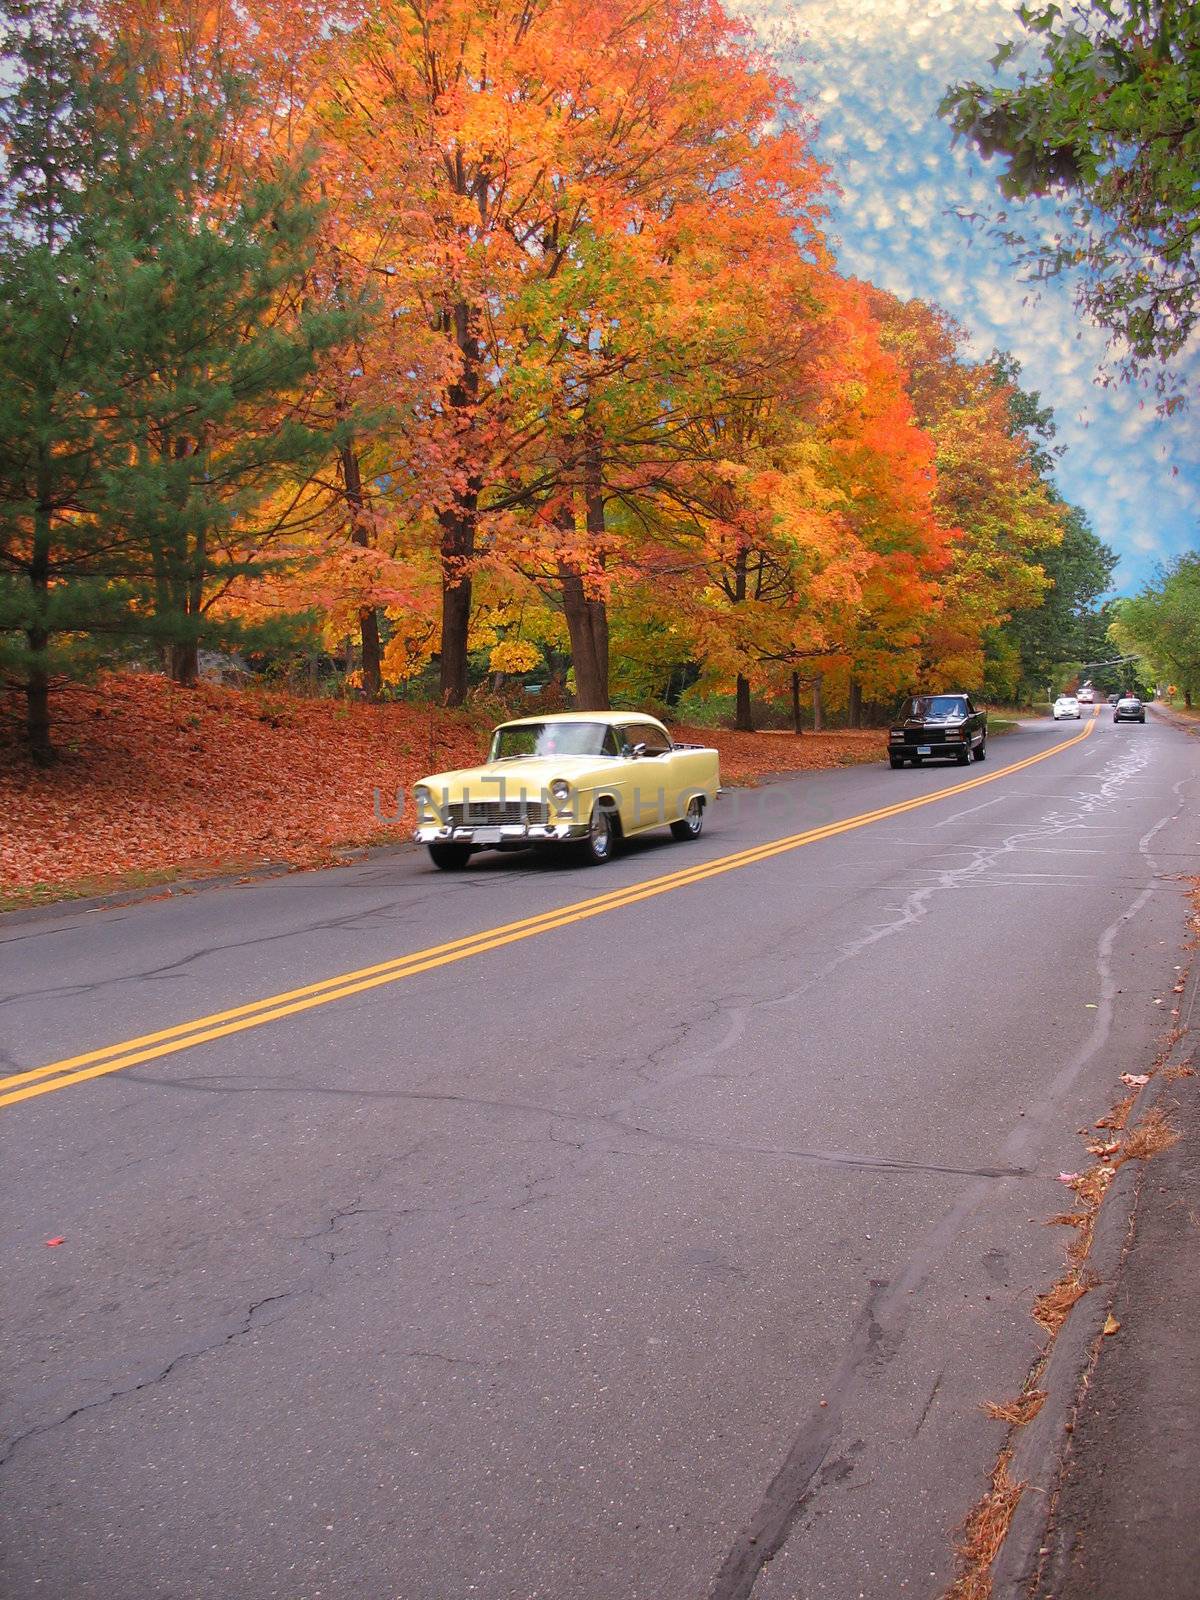 A vintage american muscle car driving down the road on a nice autumn day.